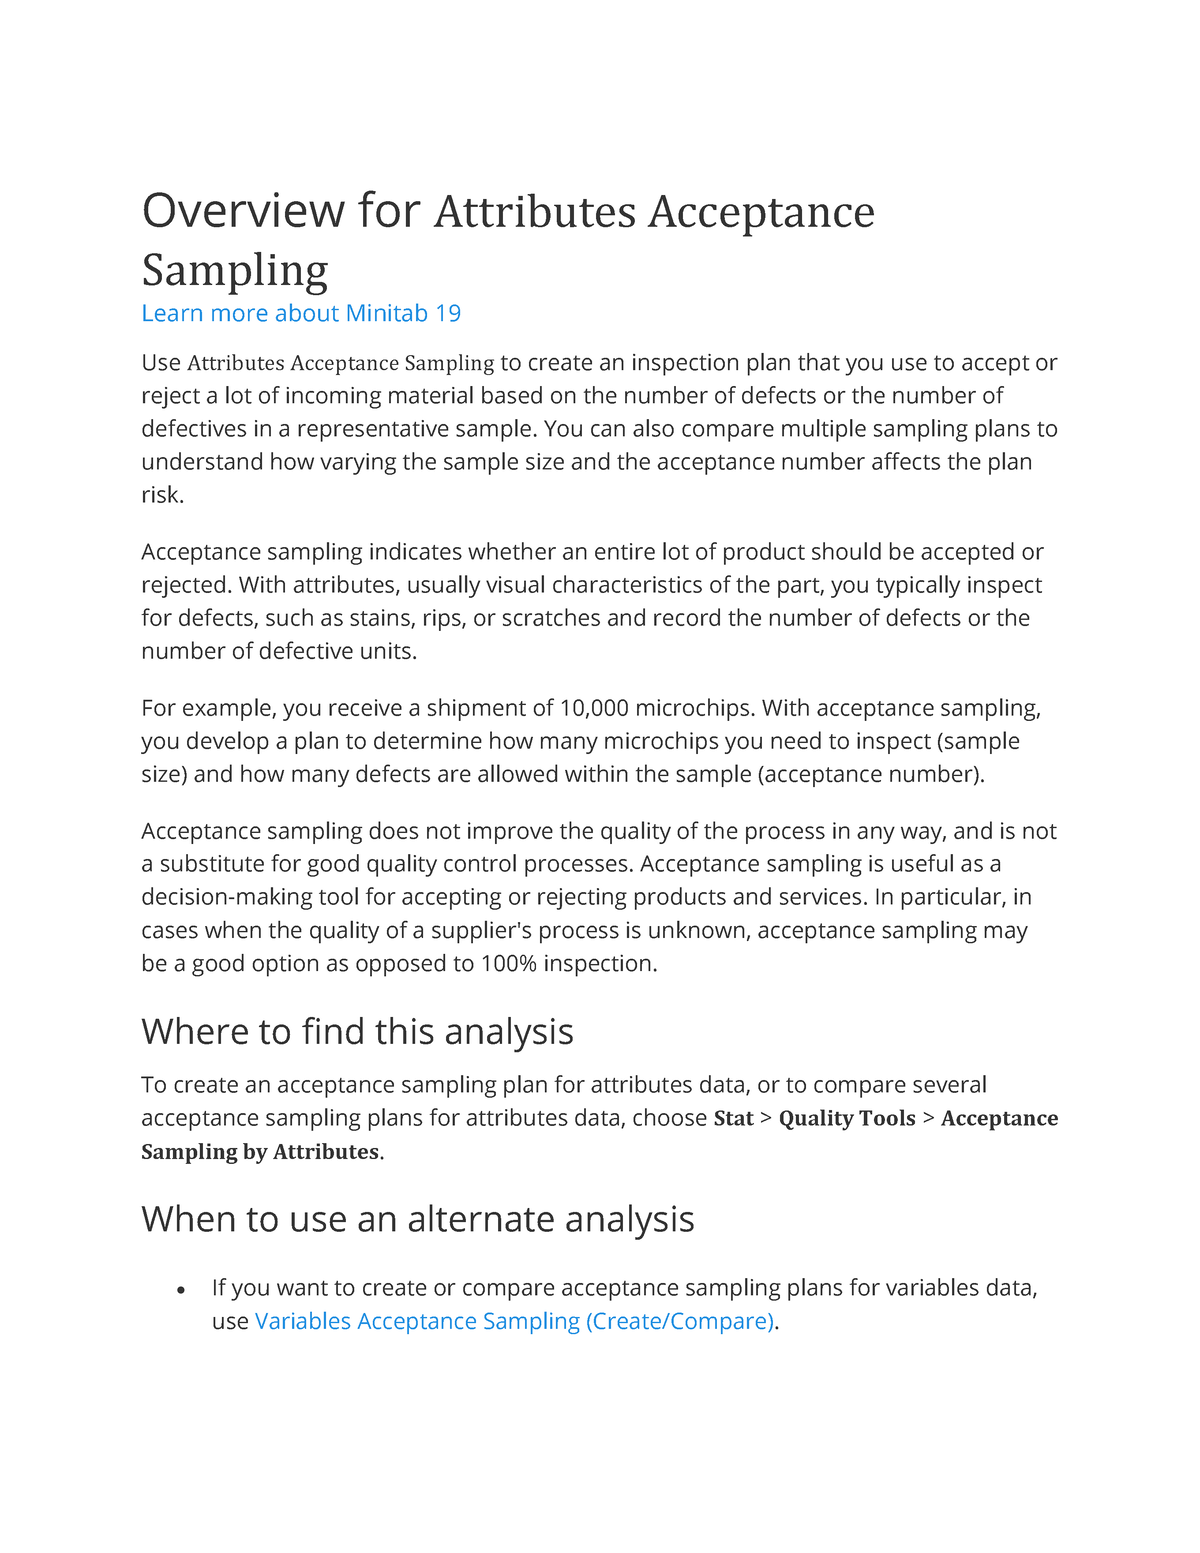 acceptance sampling by variables and attributes